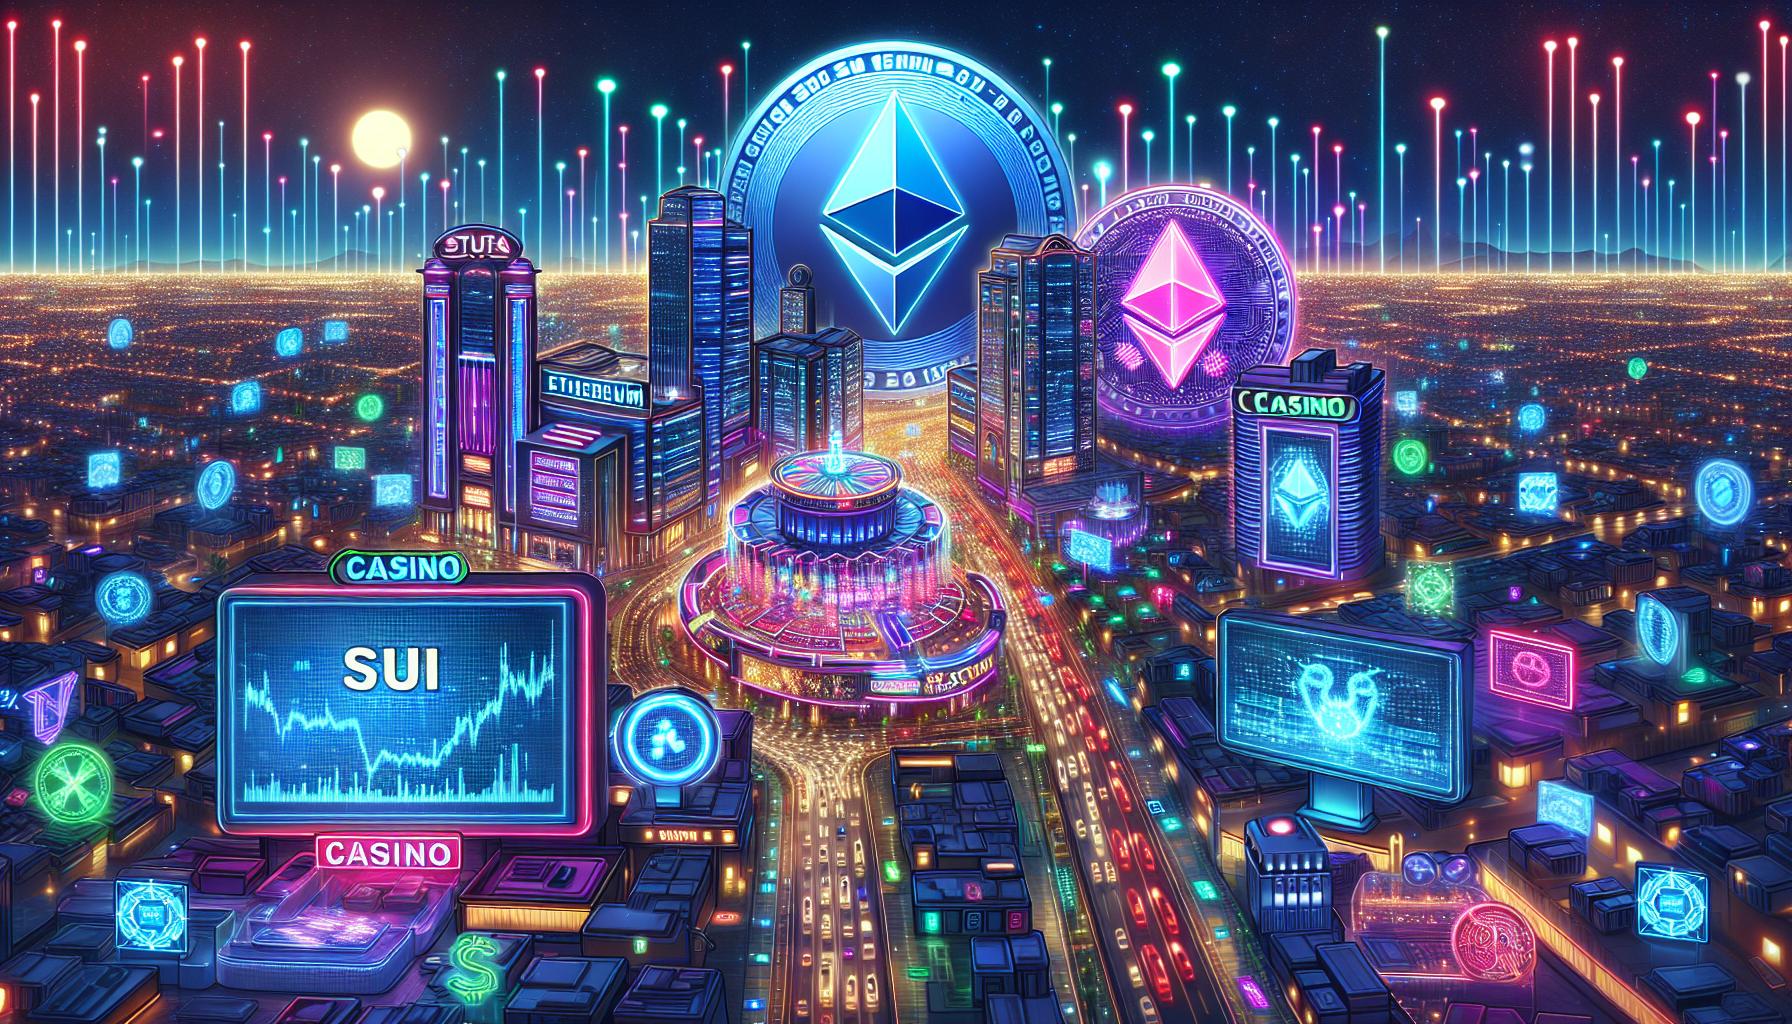 How Ethereum, Scorpion Casino, and SUI Can Help You Make Money with Cryptocurrency | FinOracle